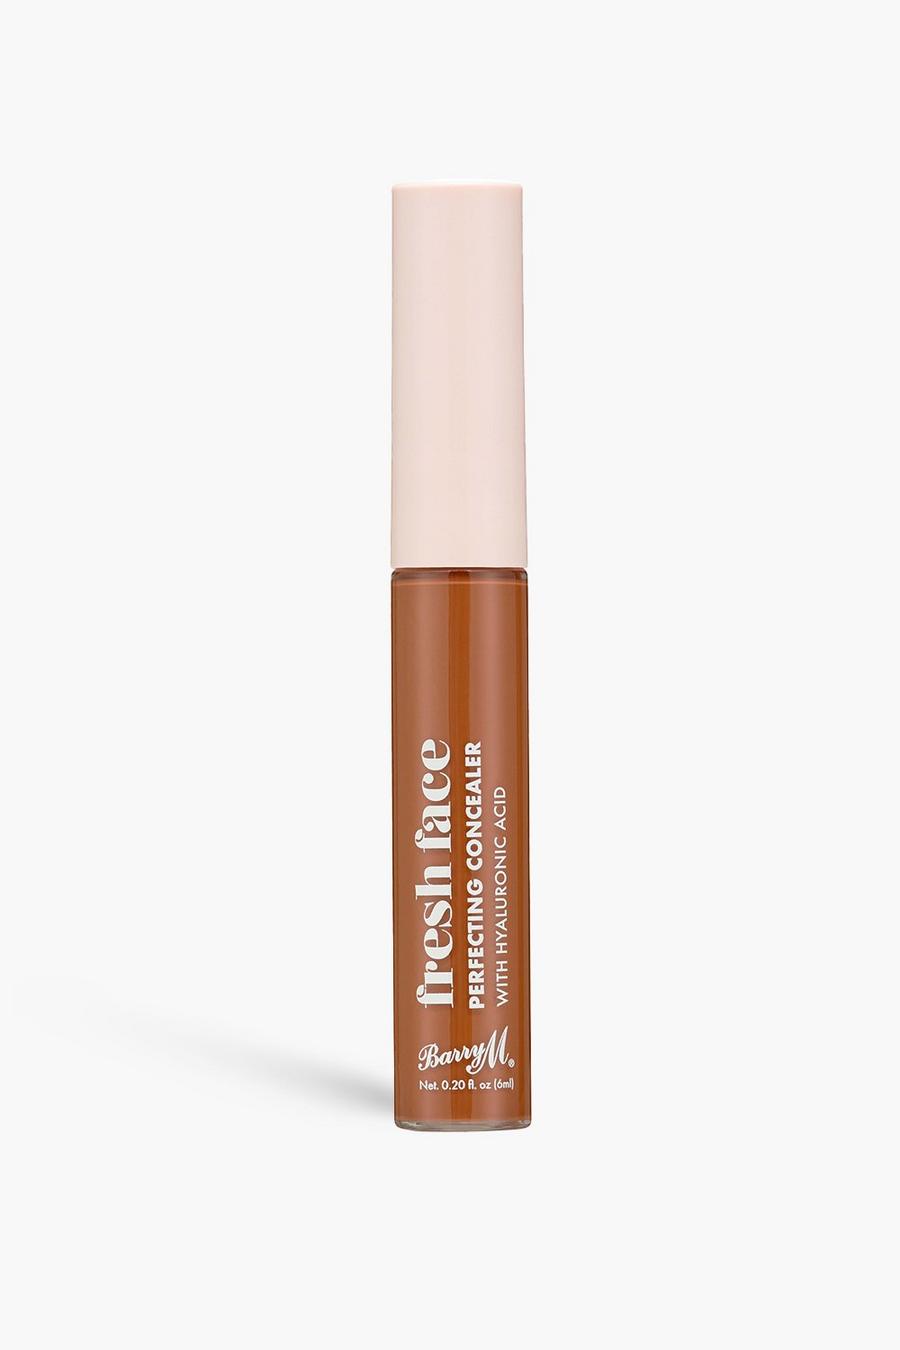 Brown brun Barry M Fresh Face Perfecting Concealer 17